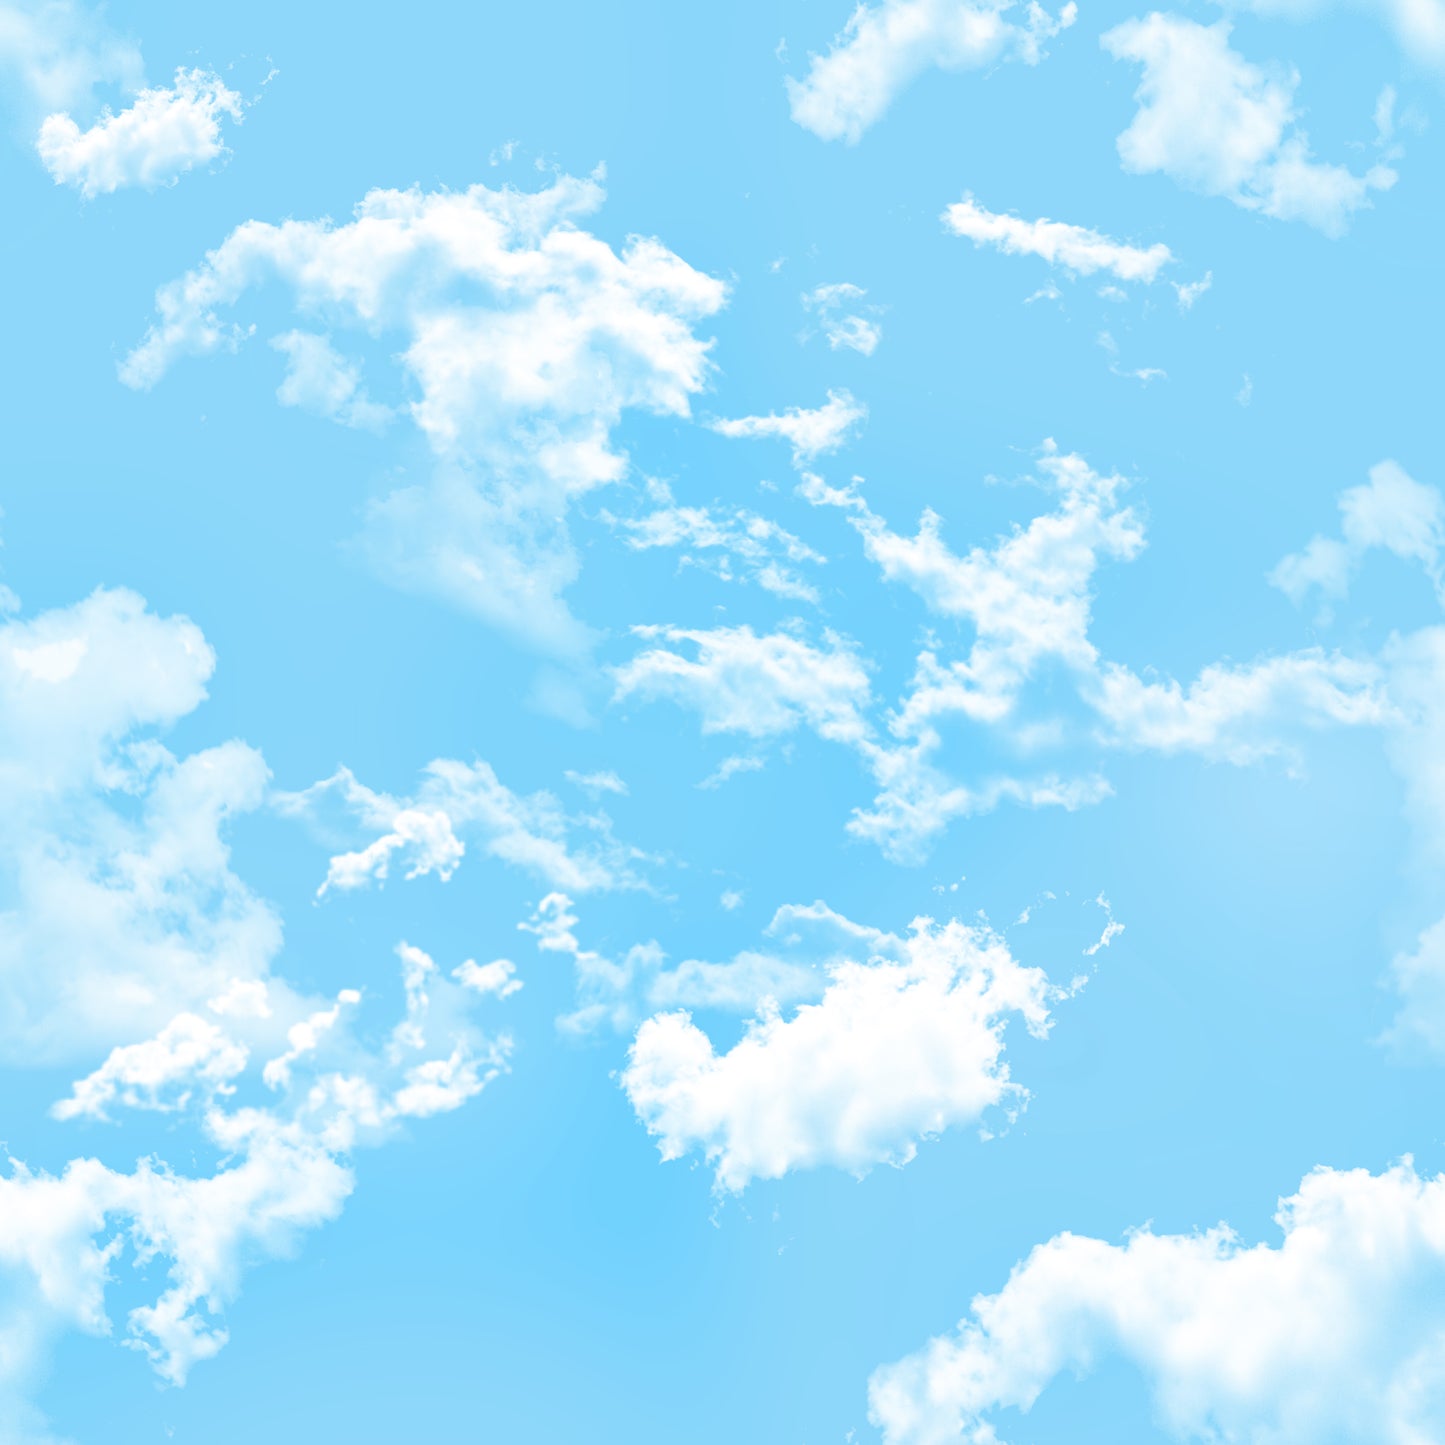 Summer Skies - Blue Sky and Clouds 001